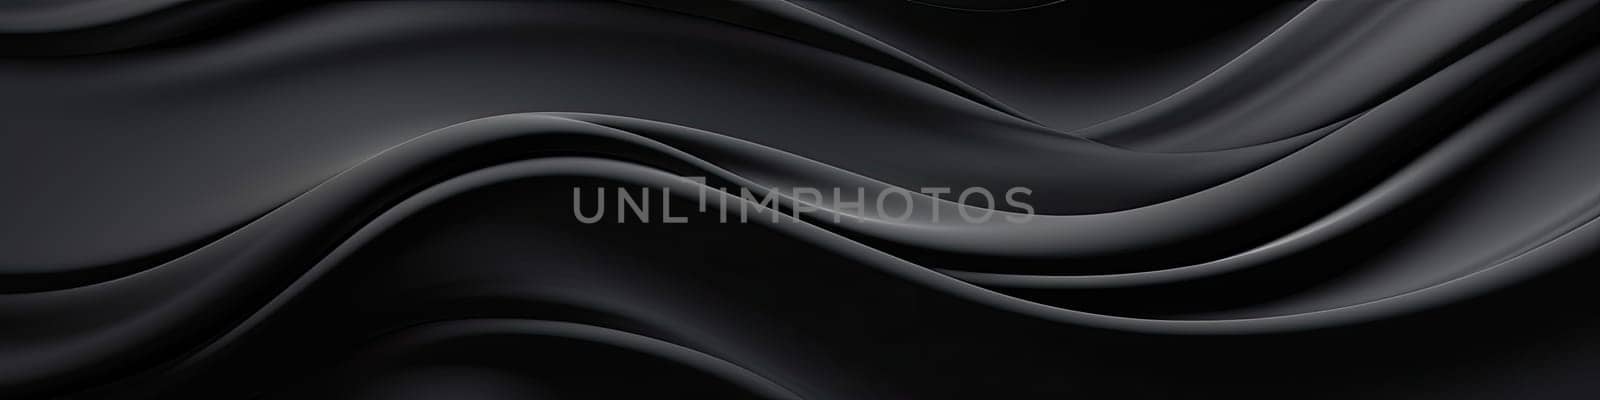 abstract background luxury black cloth or a liquid wave or wavy fold of grunge silk texture satin velvet as banner